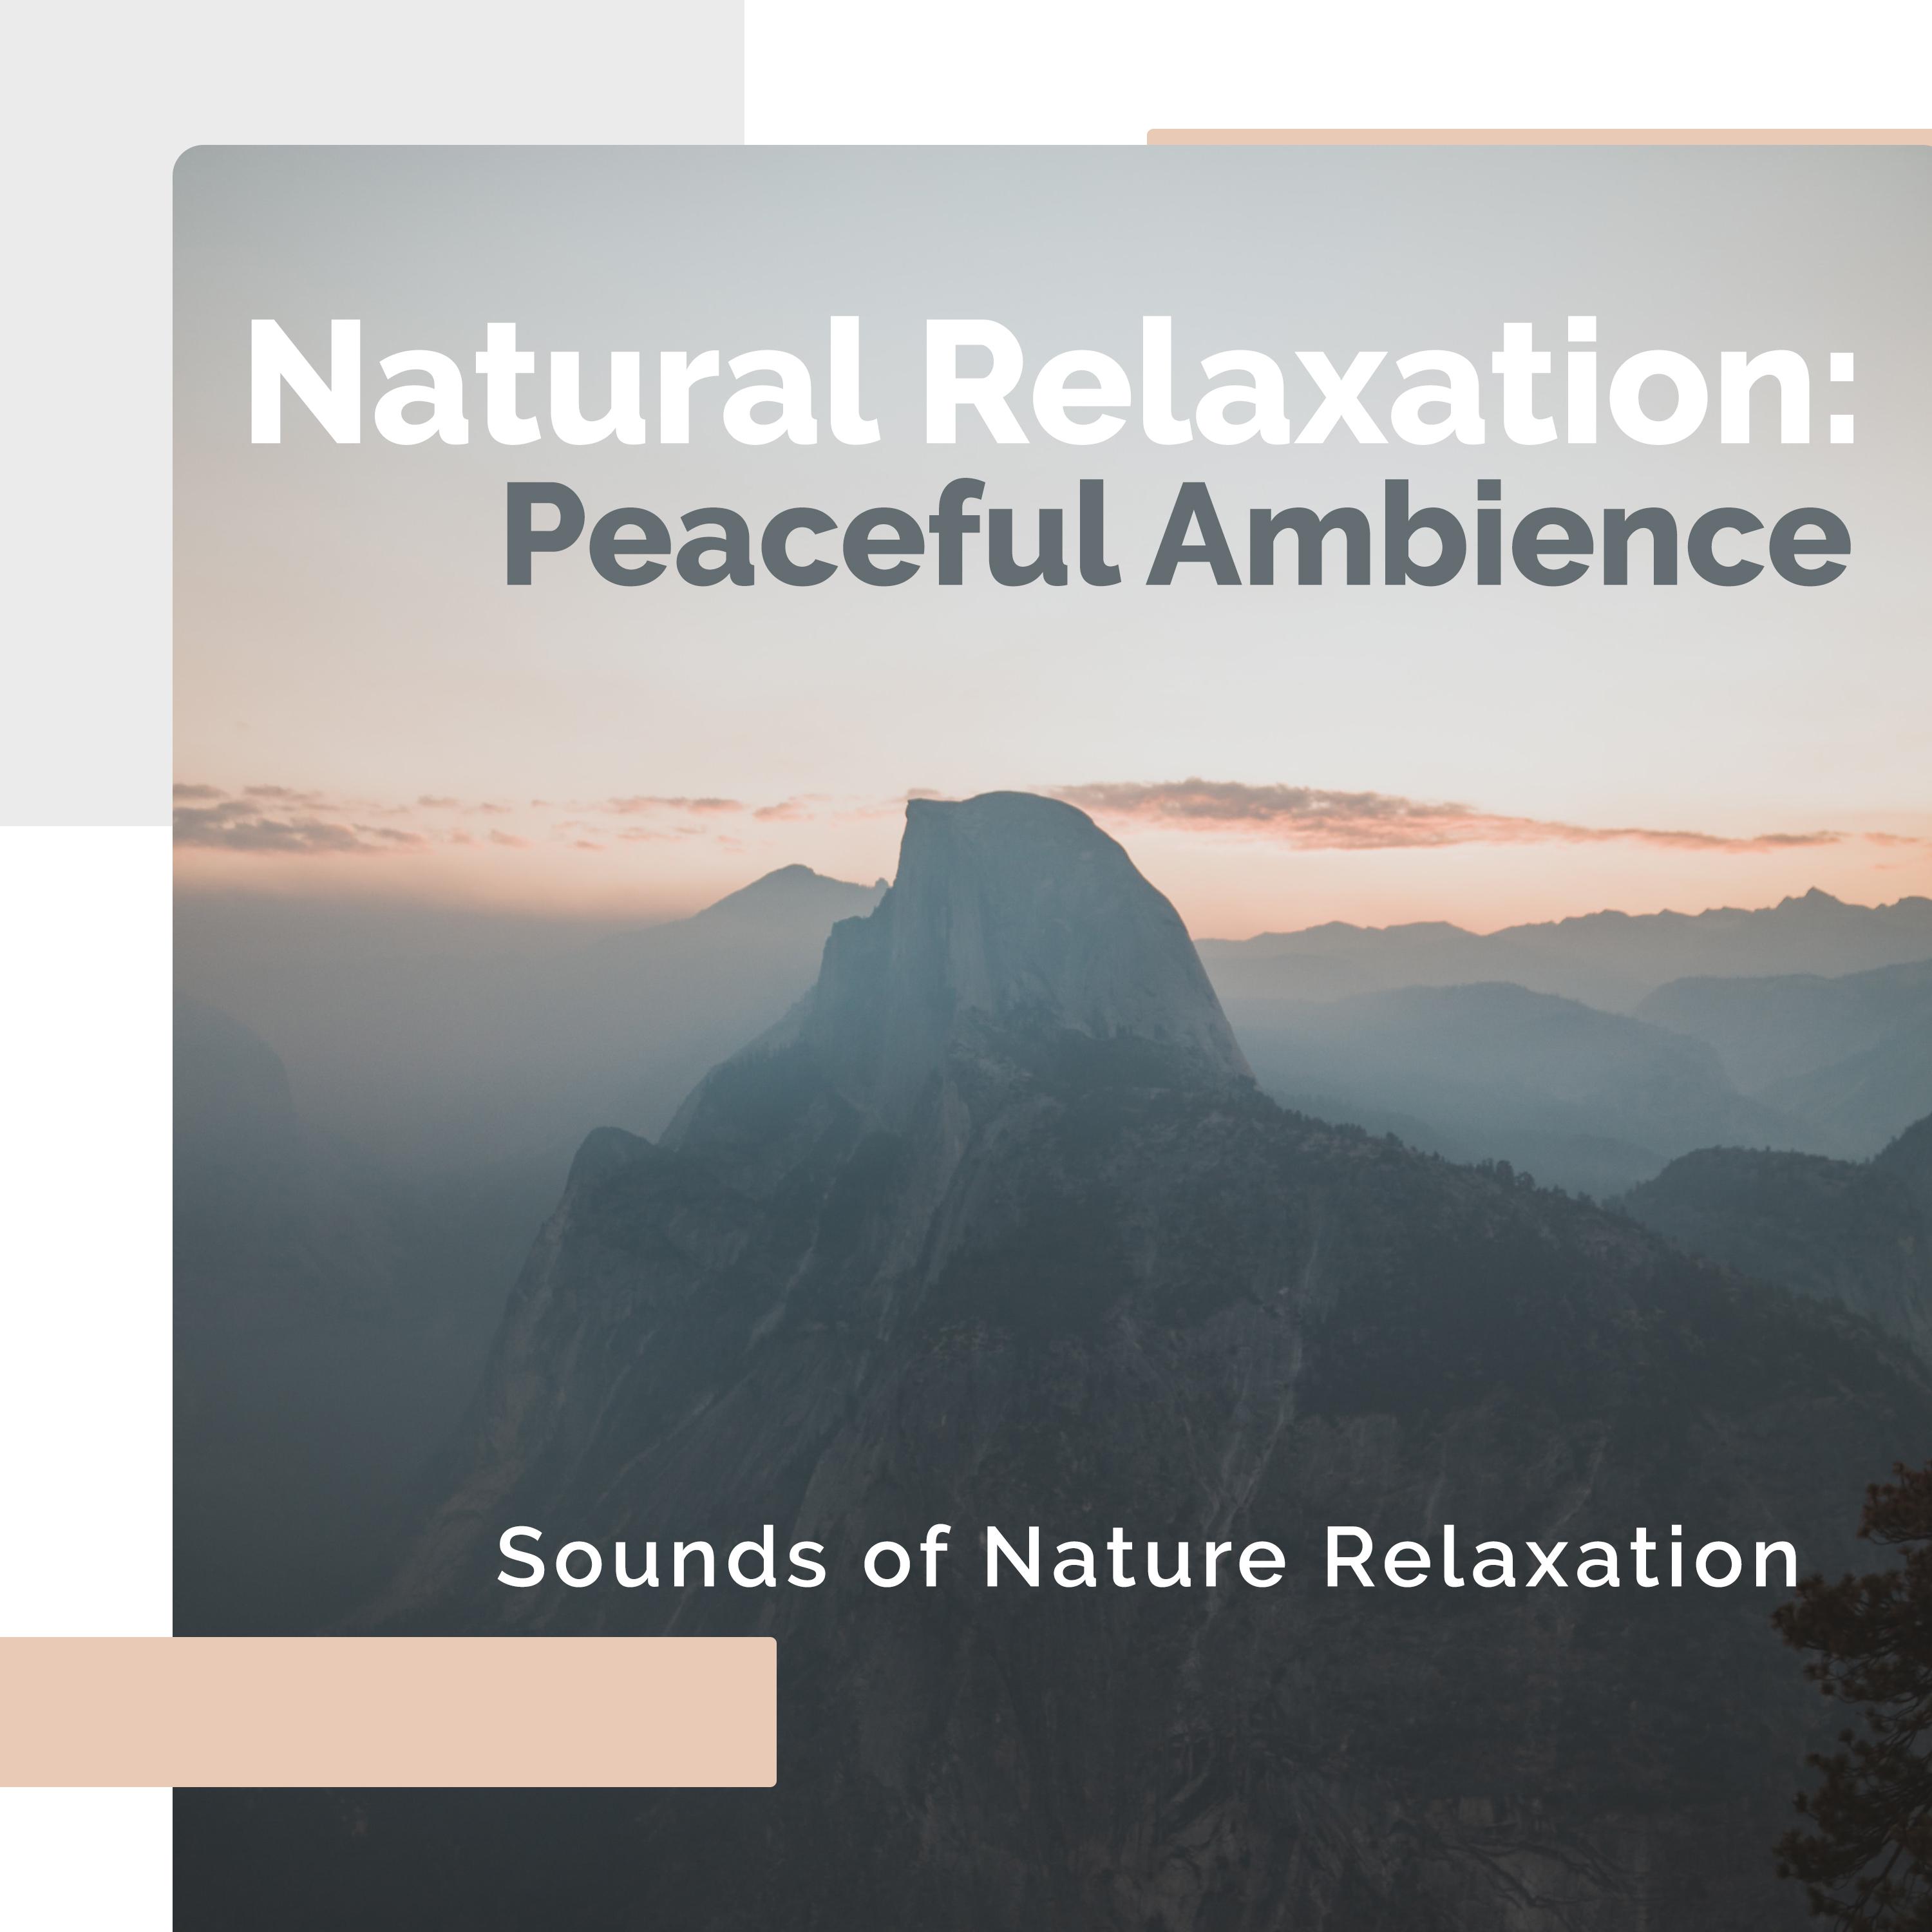 Natural Relaxation: Peaceful Ambience